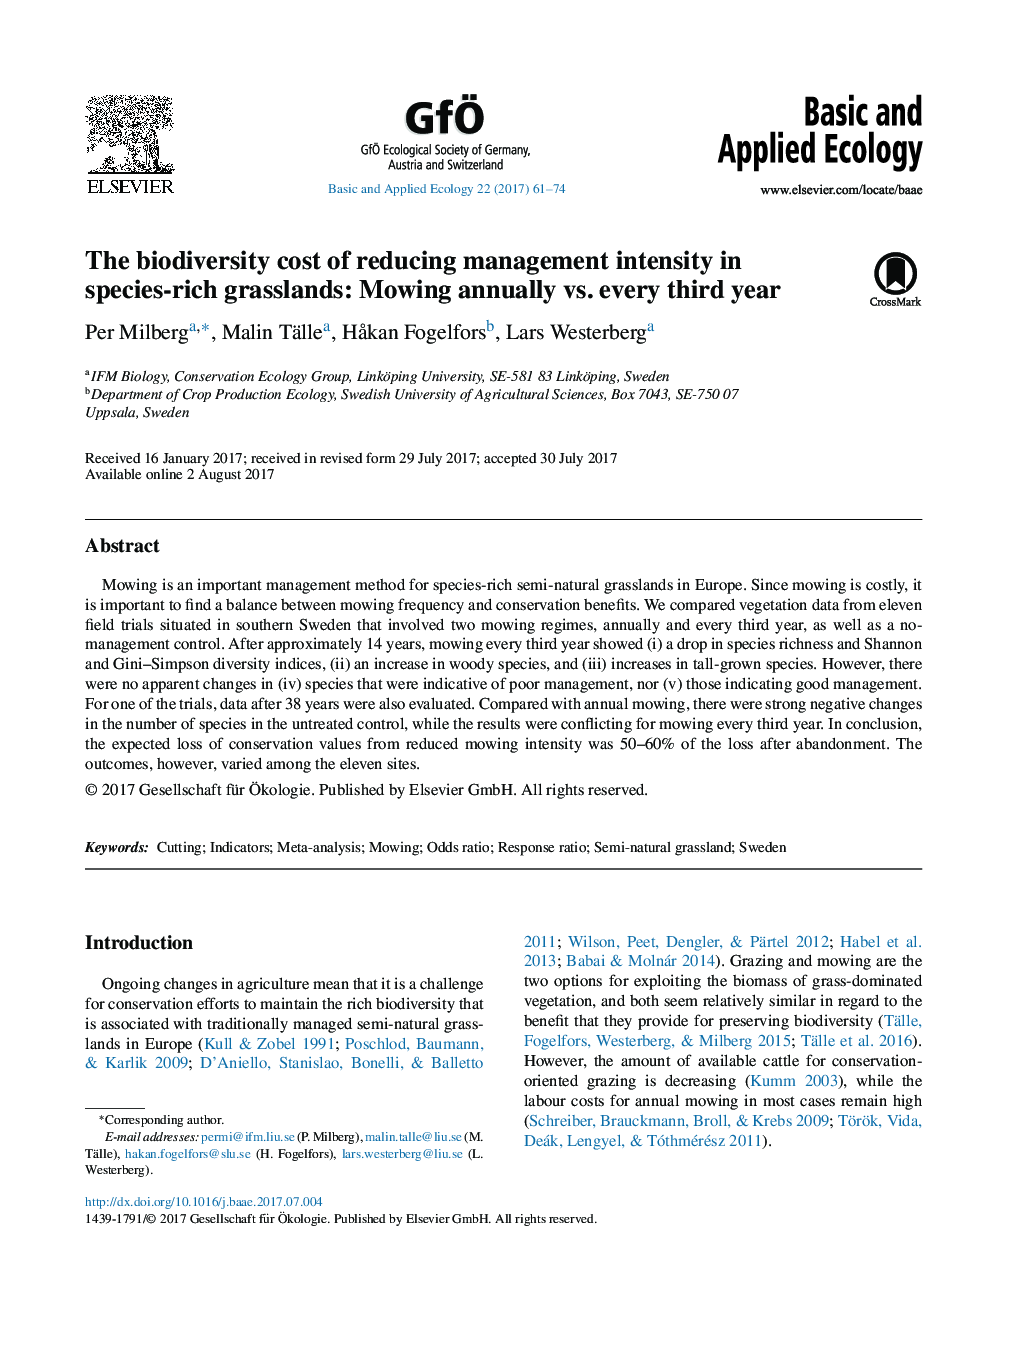 The biodiversity cost of reducing management intensity in species-rich grasslands: Mowing annually vs. every third year